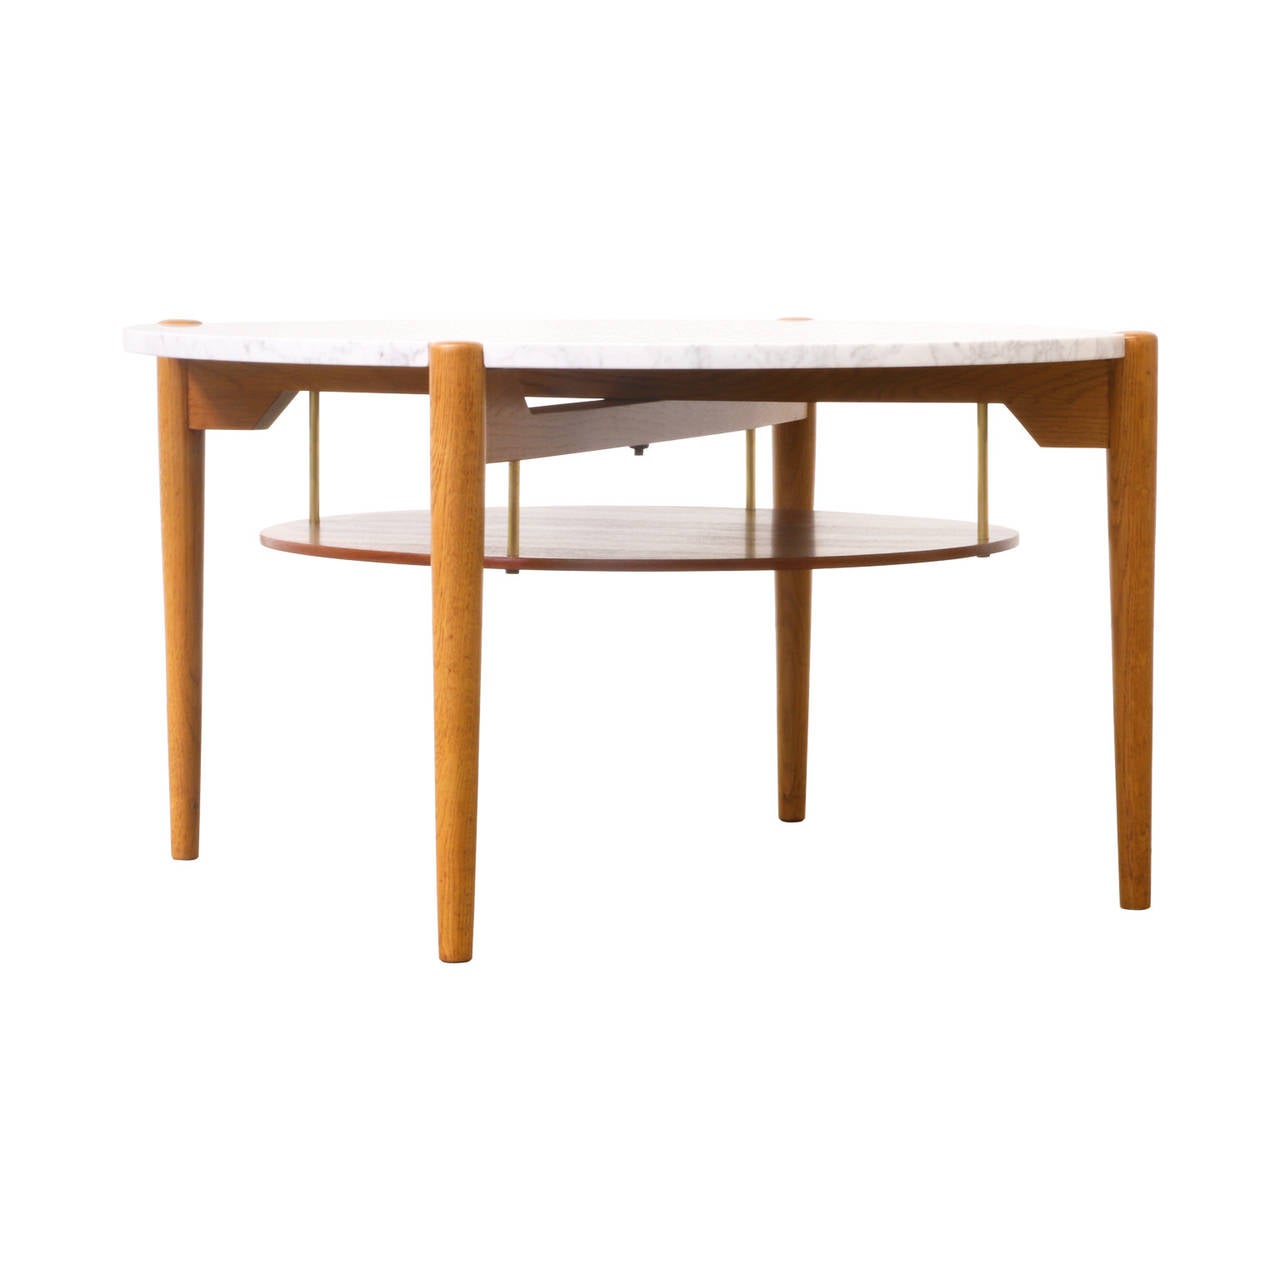 Designer: Unknown
Manufacturer: Unknown
Period/Style: Mid Century Modern
Country: United States
Date: 1960’s

Dimensions: 18.75″H x 33.75″W
Materials: Teak, Marble
Condition: Excellent – Newly Refinished
Number of Items: 1
ID Number: